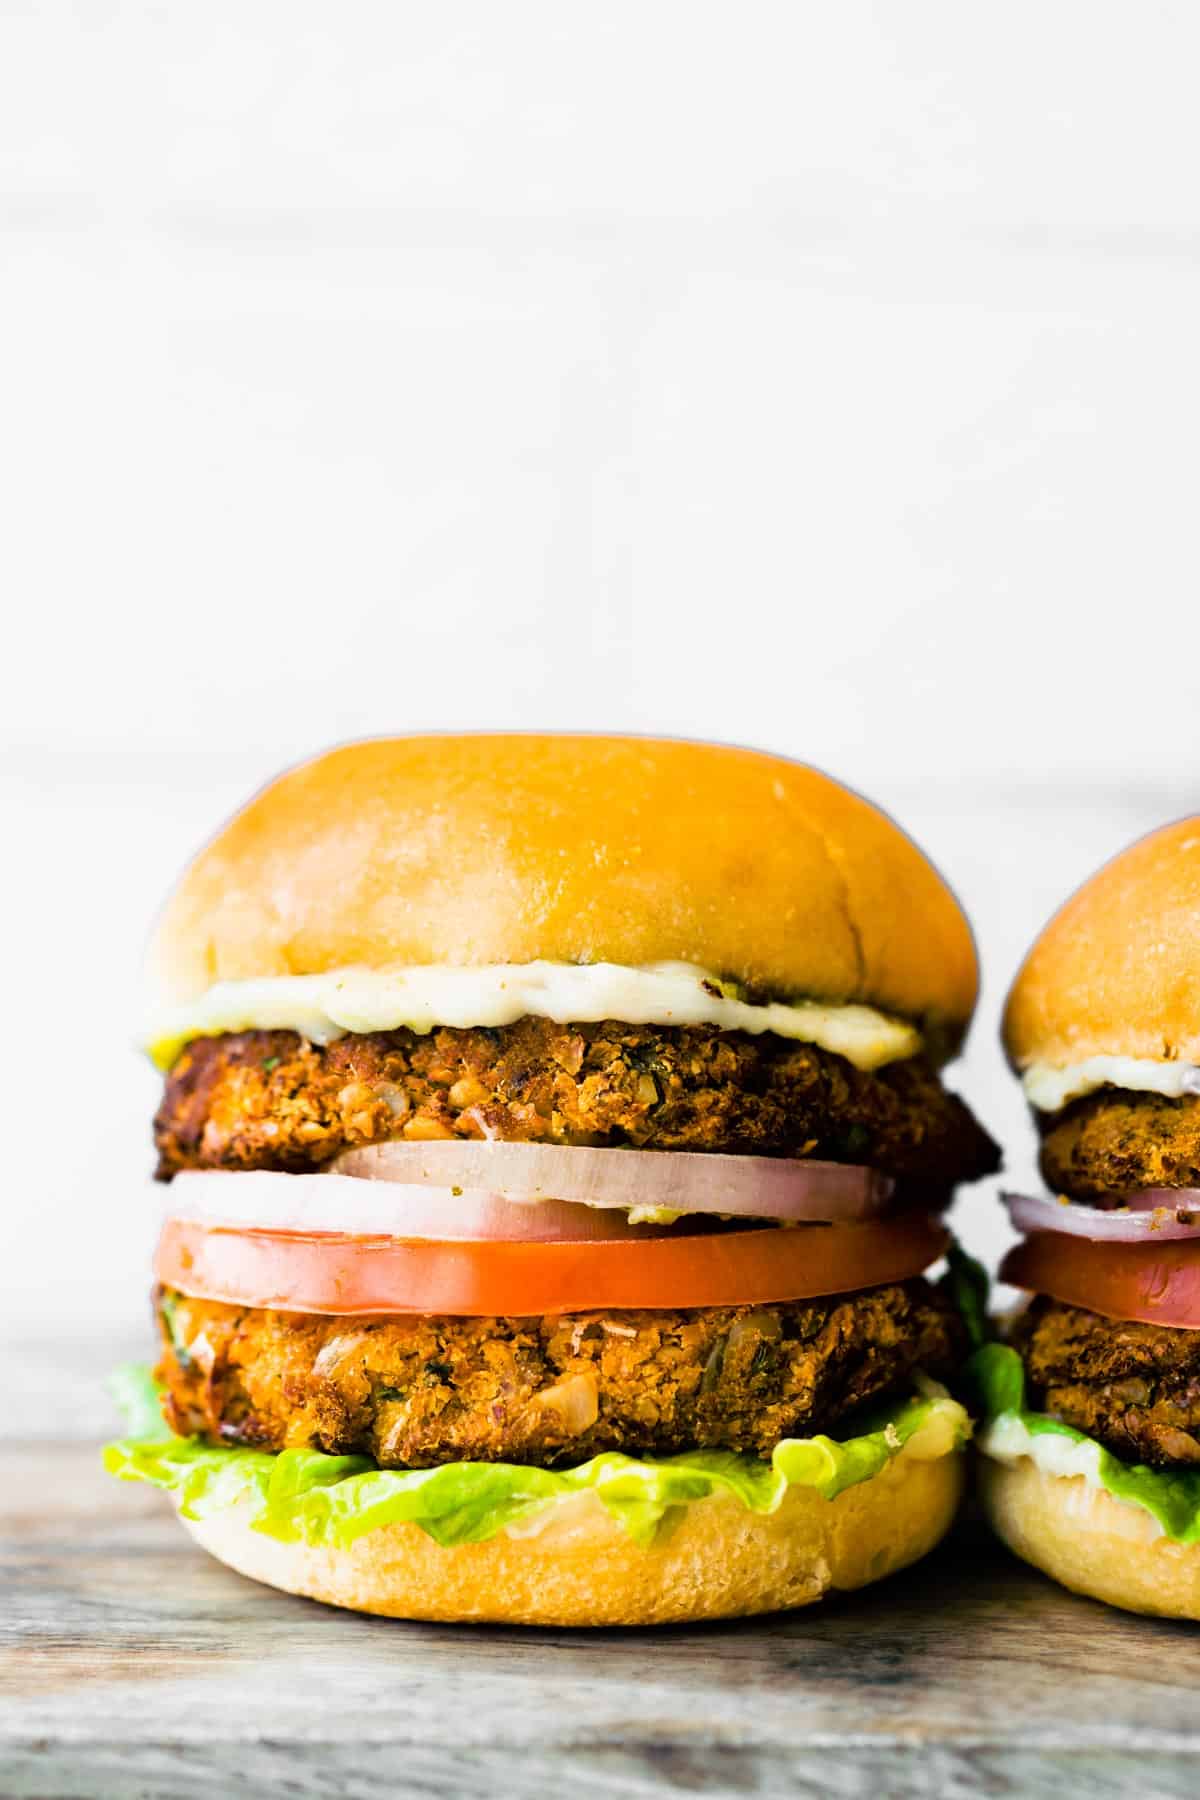 Two dairy free chickpea burgers on gluten free buns with red onion and tomato.